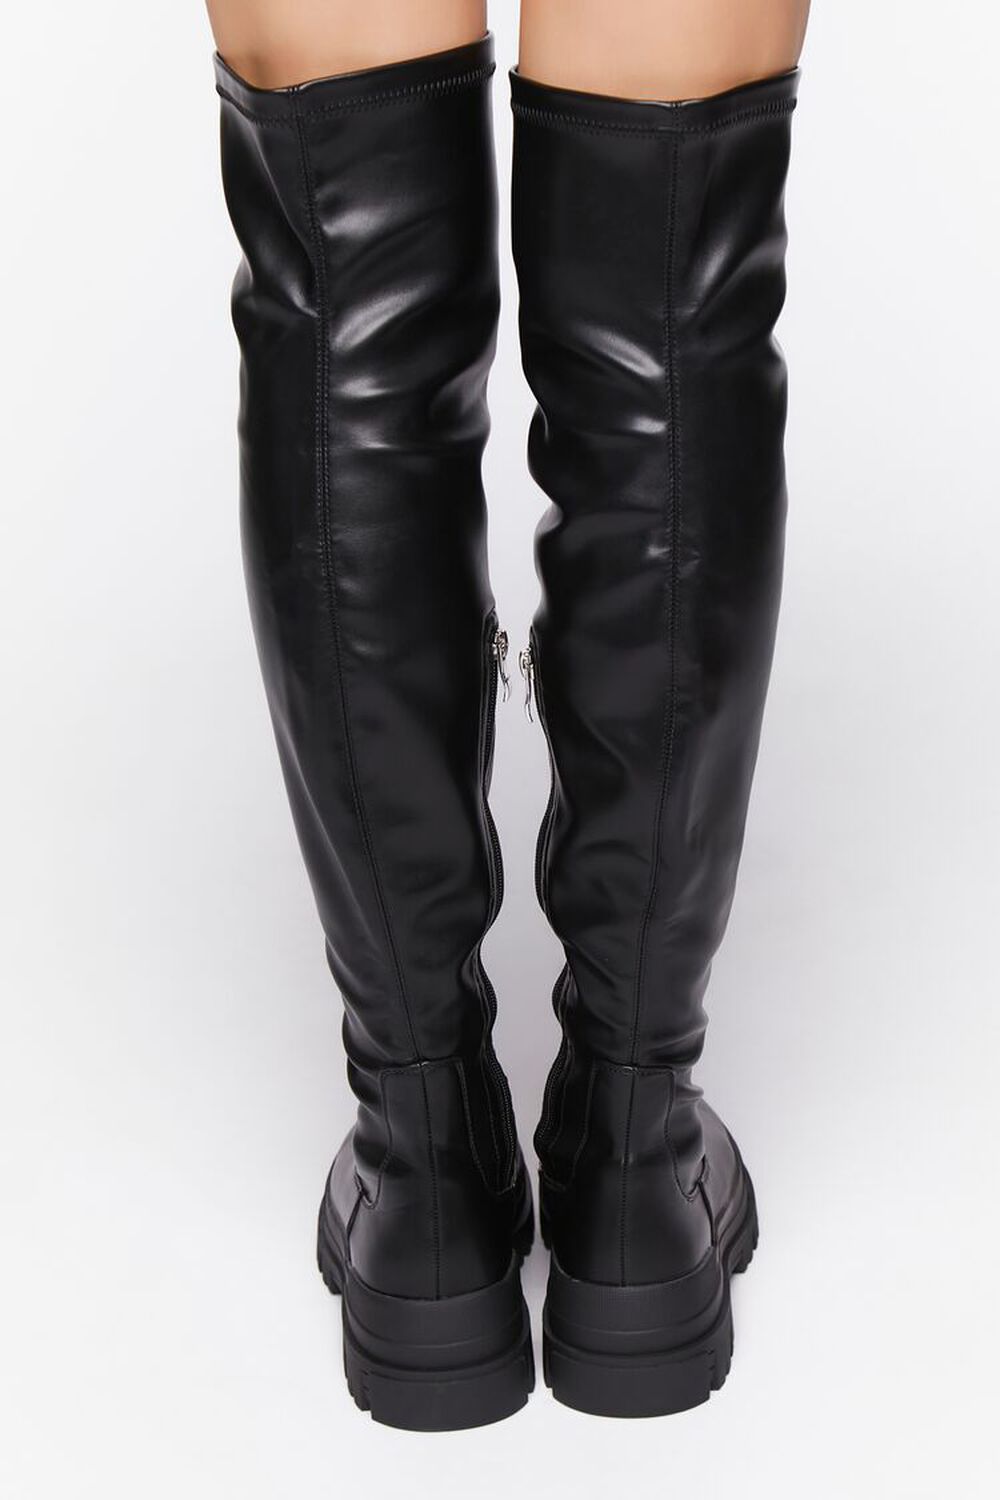 BLACK Over-the-Knee Lug-Sole Boots, image 3